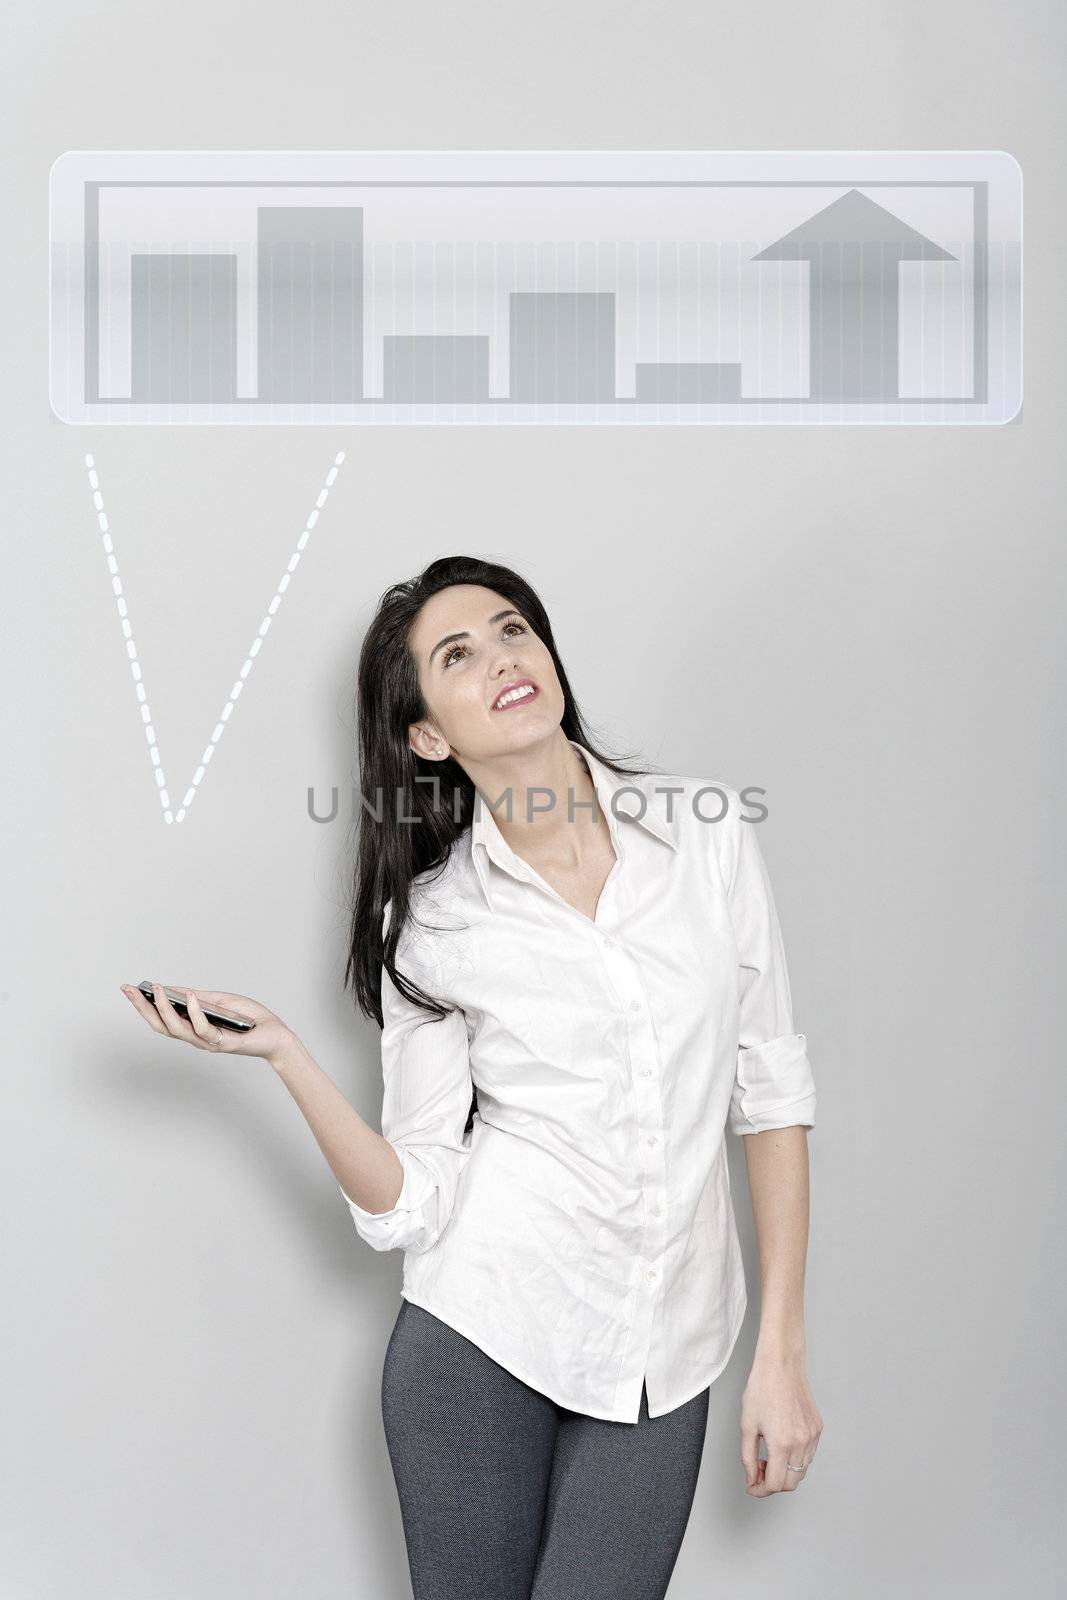 Woman holding out her mobile phone which is displaying graphs and charts